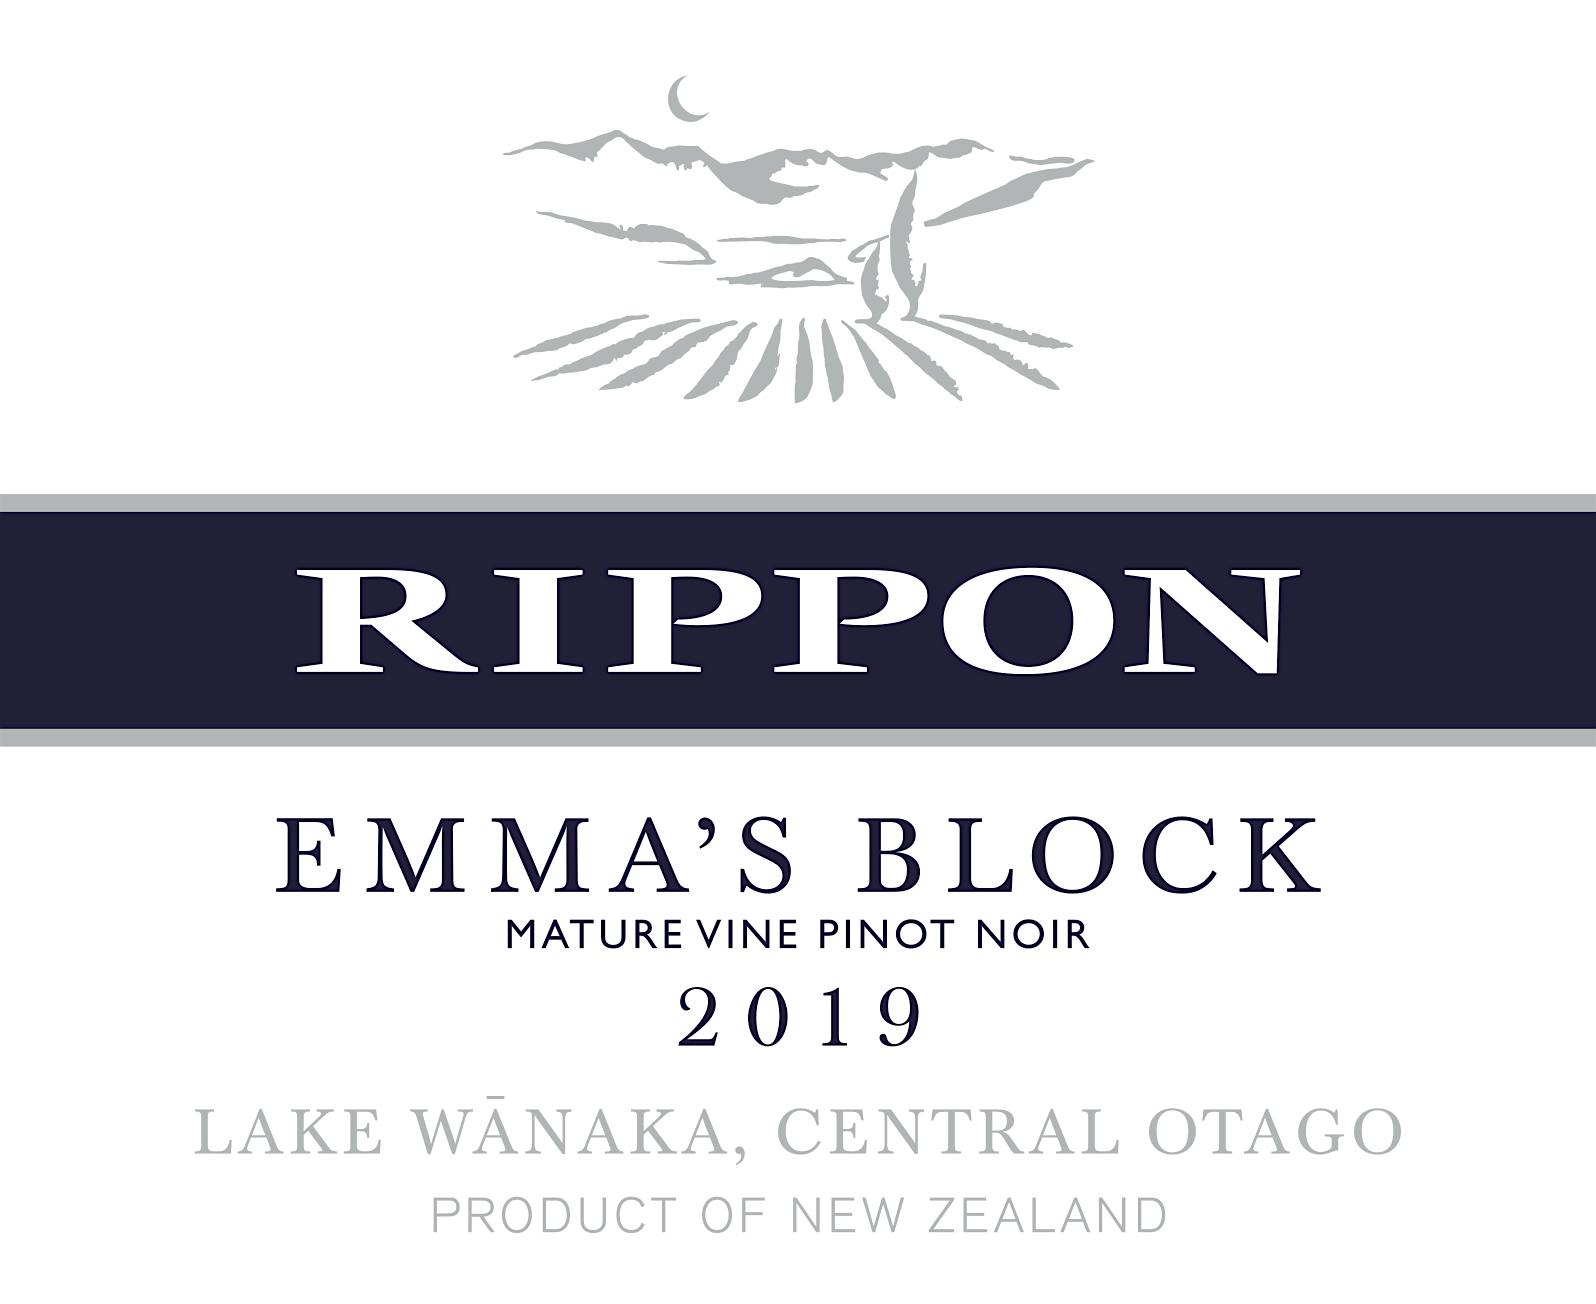 Label for Rippon